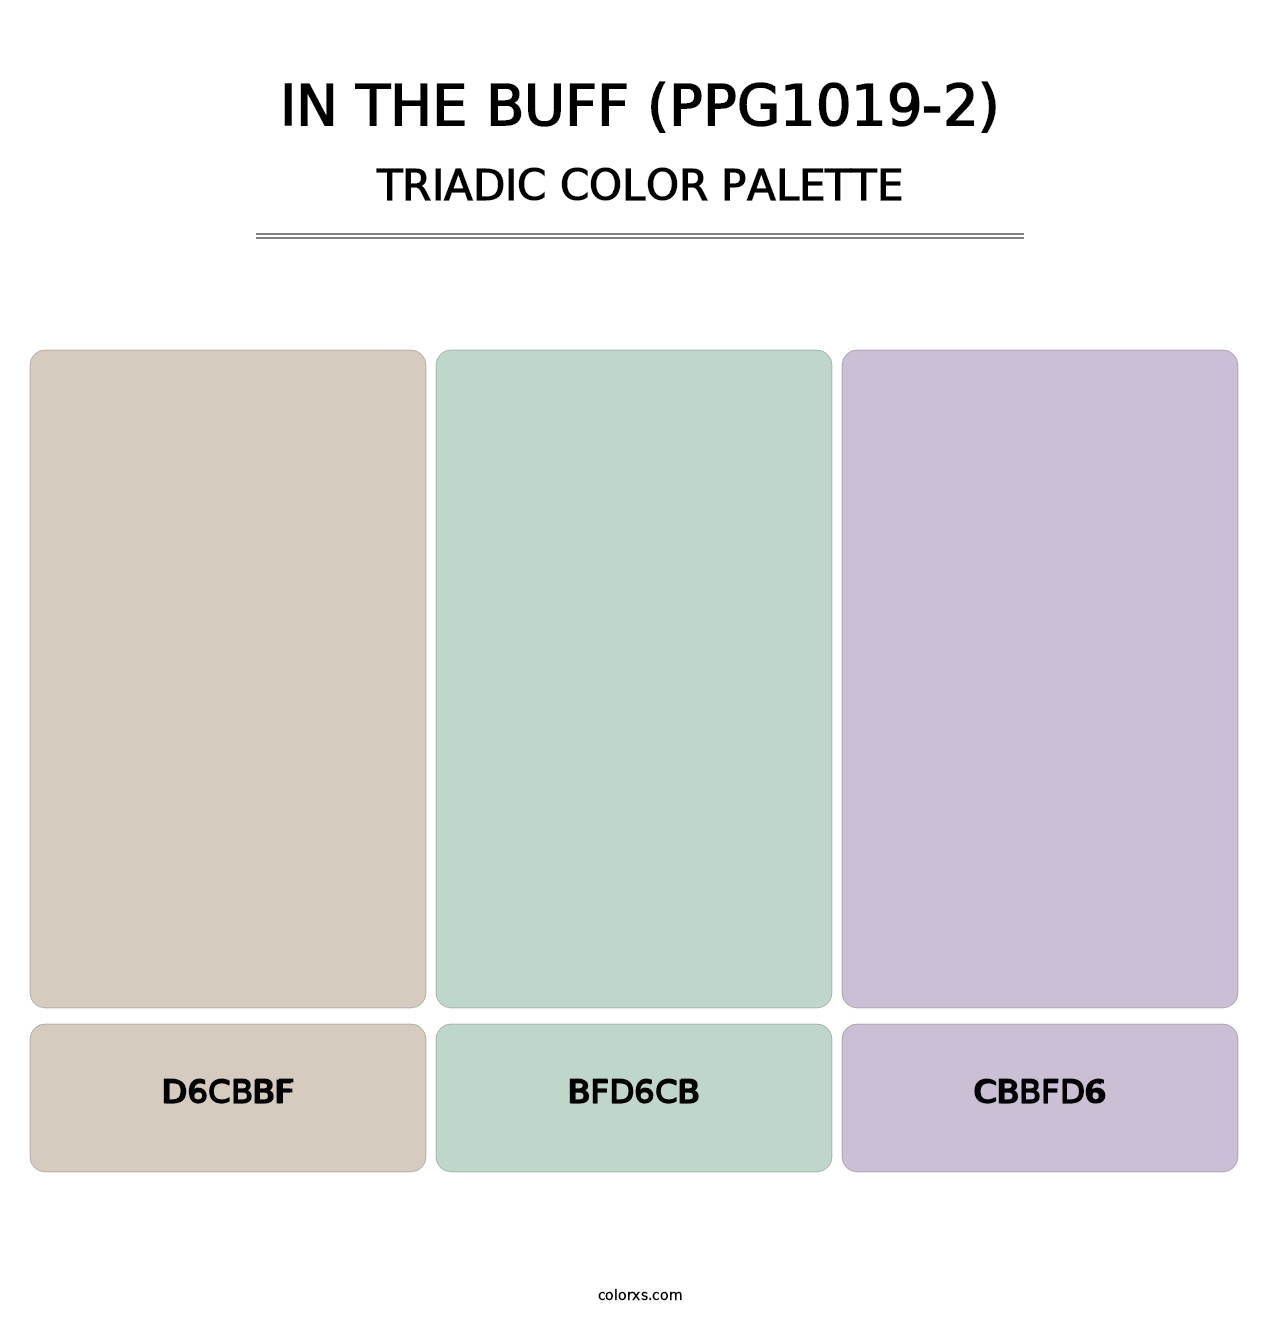 In The Buff (PPG1019-2) - Triadic Color Palette